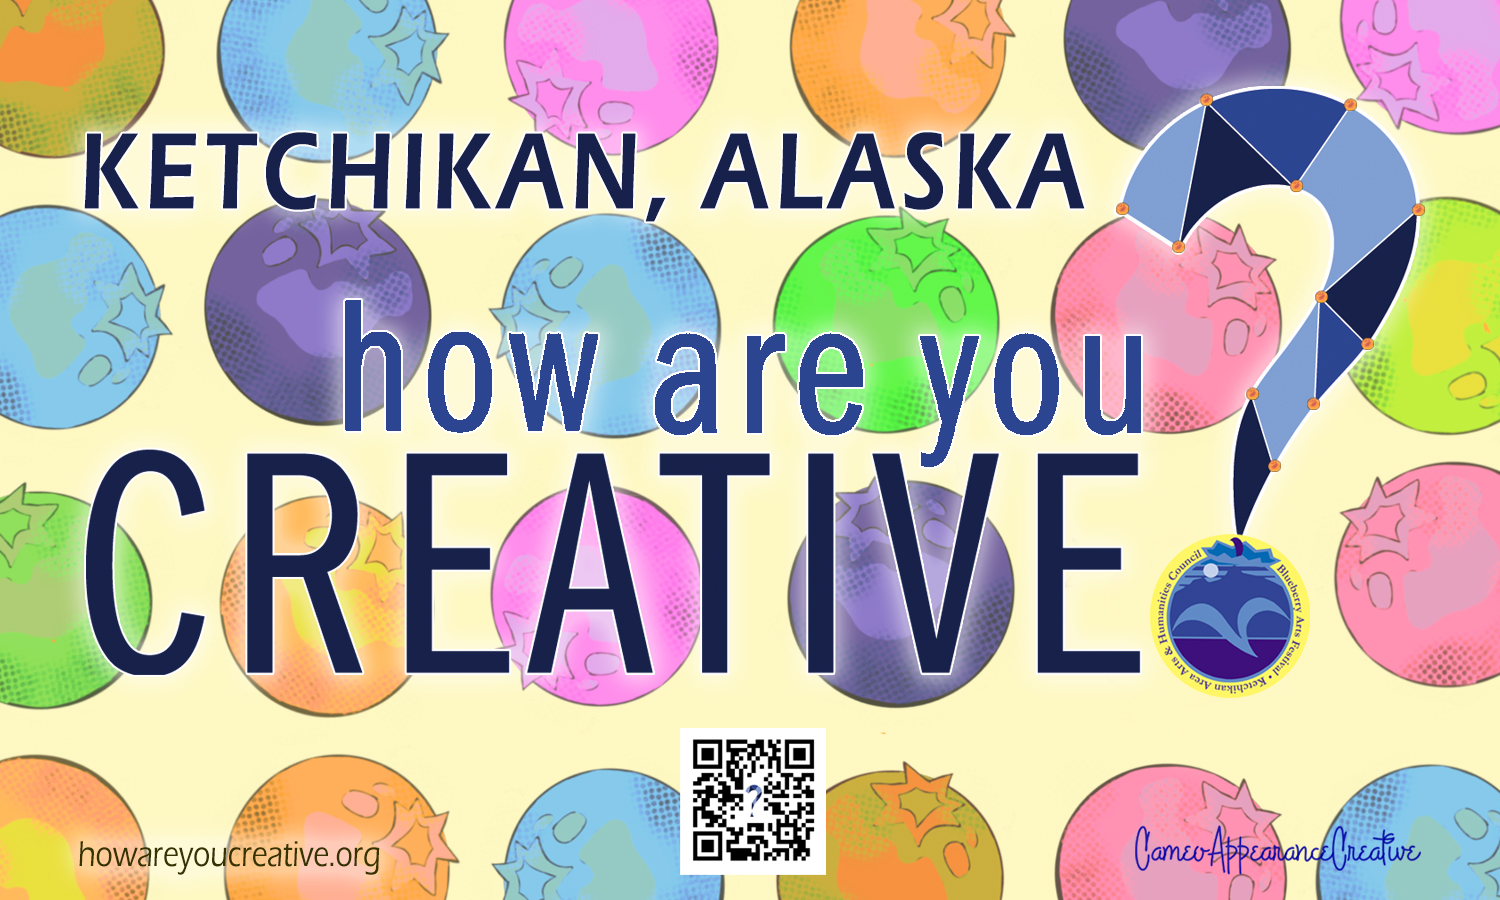 An image of the Ketchikan, how are you creative? sticker